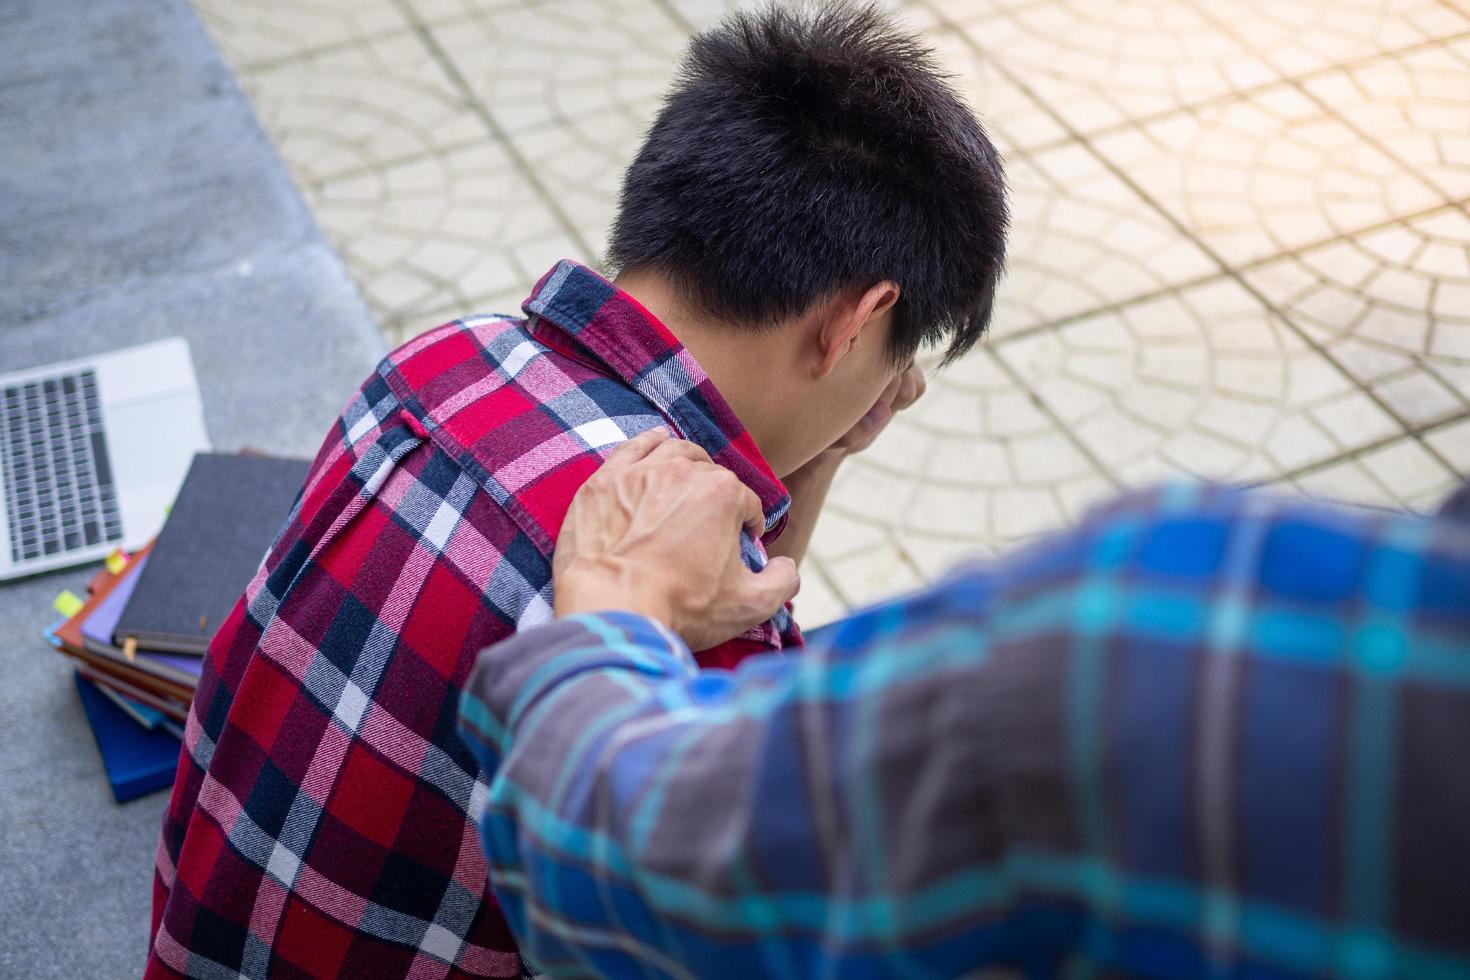 The hand touching the shoulder showed encouragement after the male students were disappointed with the problems of the test results or heartbroken with their girlfriend. Friendship and caring concepts photo